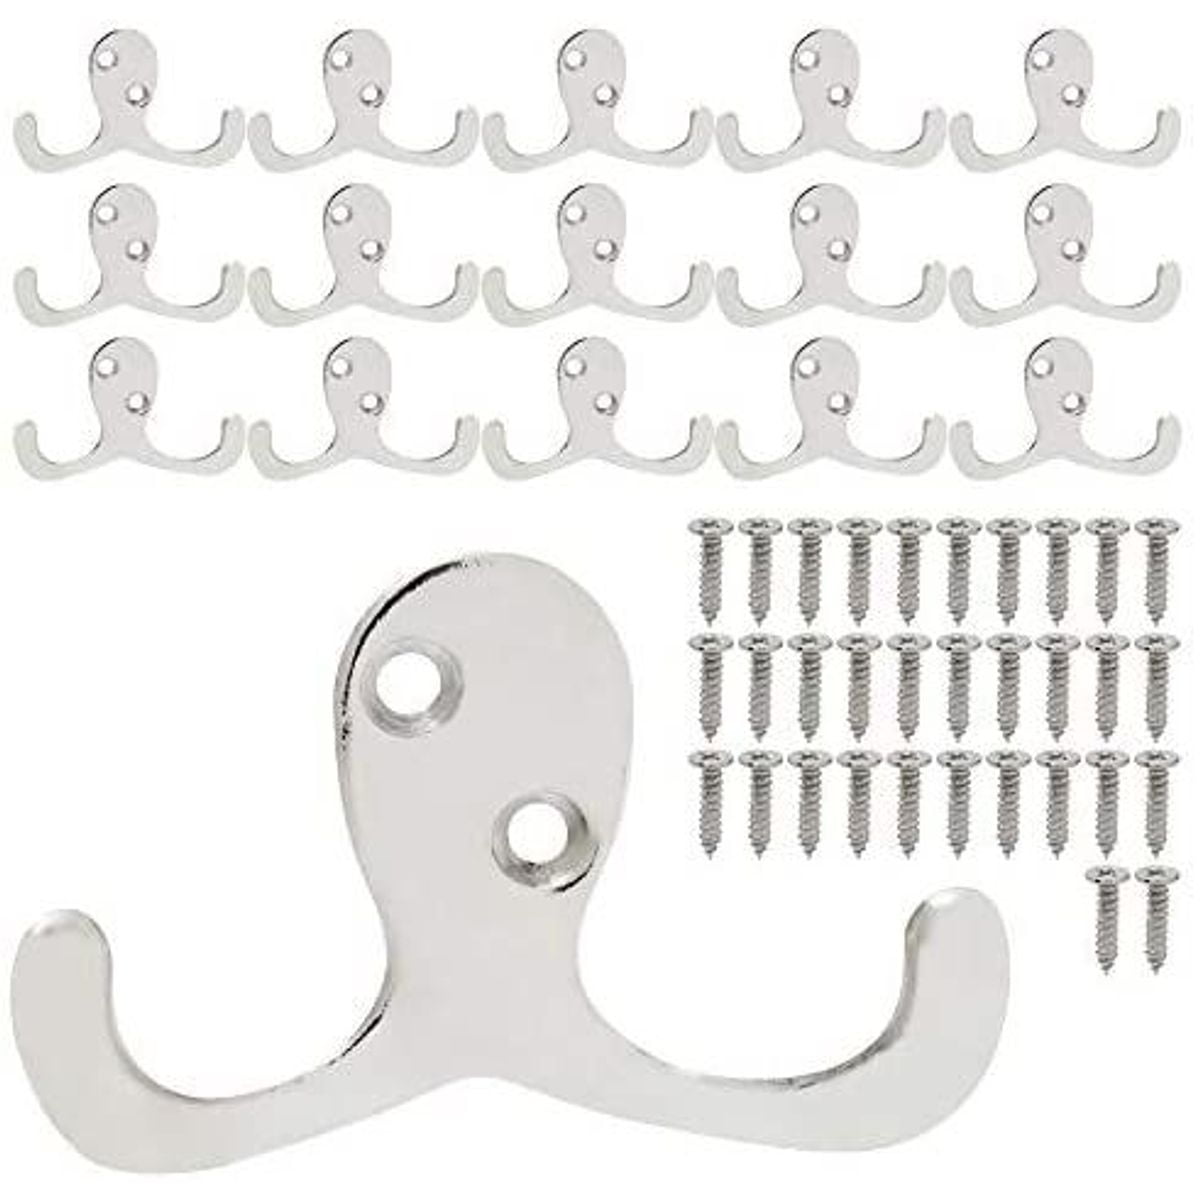 10Pcs Double Prong Robe Wall Mount Hooks Modern Cloth Hanger With Screws Kit 